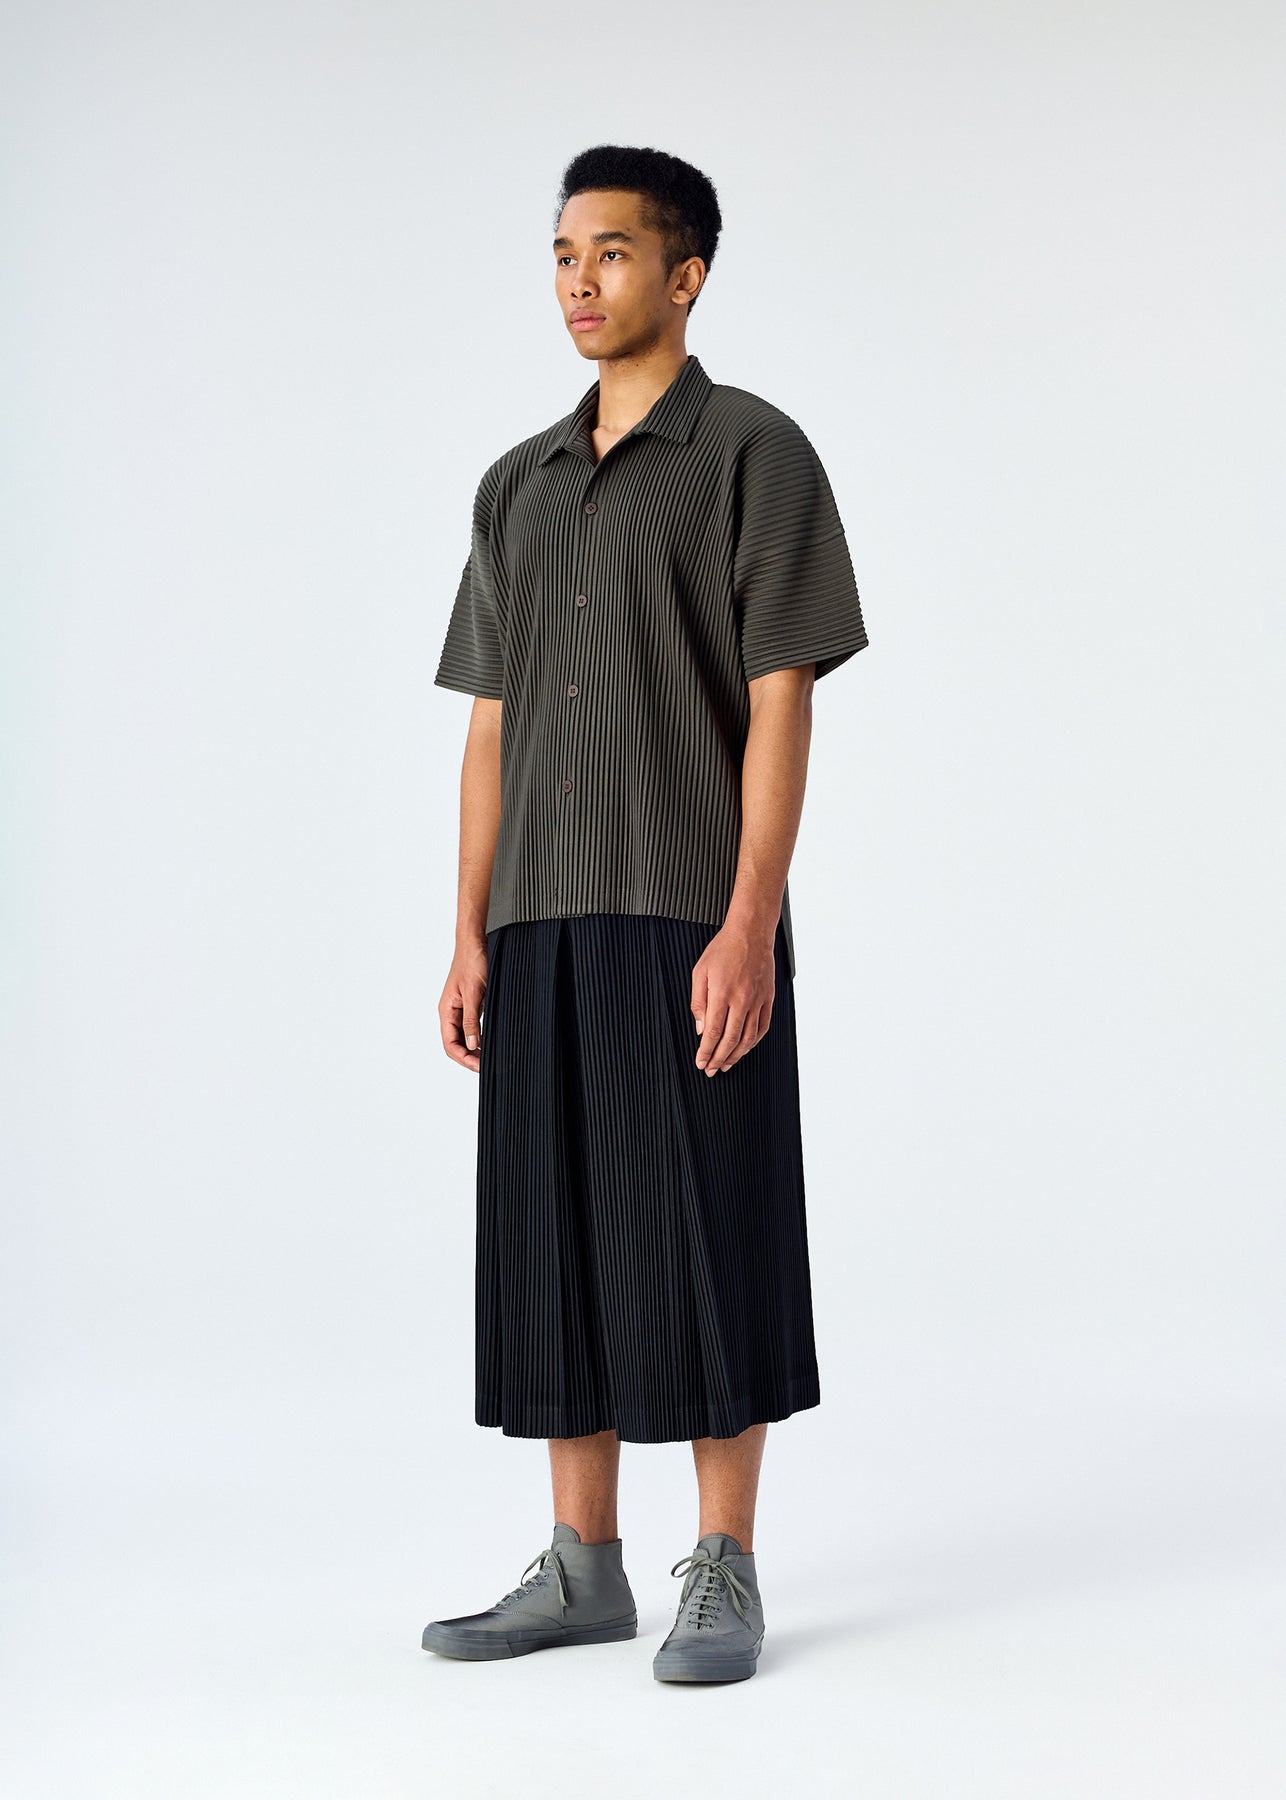 PLEATS BOTTOMS 1 PANTS | The official ISSEY MIYAKE ONLINE STORE